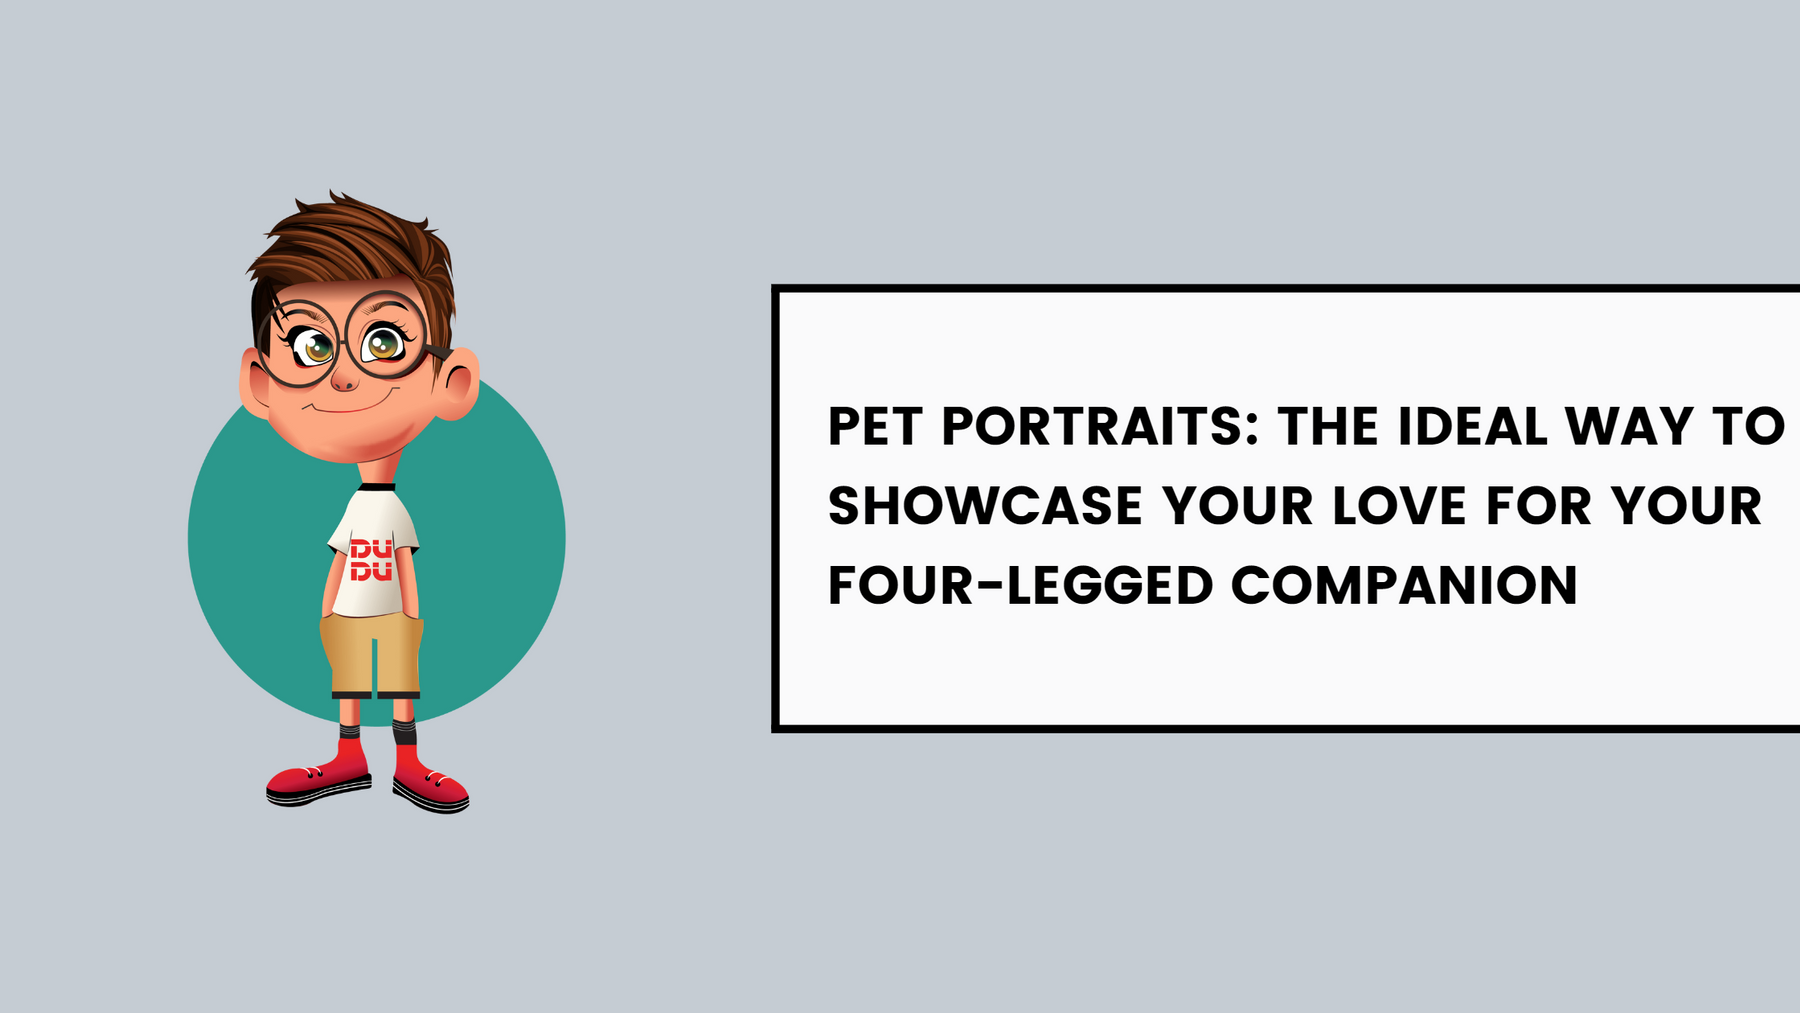 Pet Portraits: The Ideal Way To Showcase Your Love For Your Four-Legged Companion